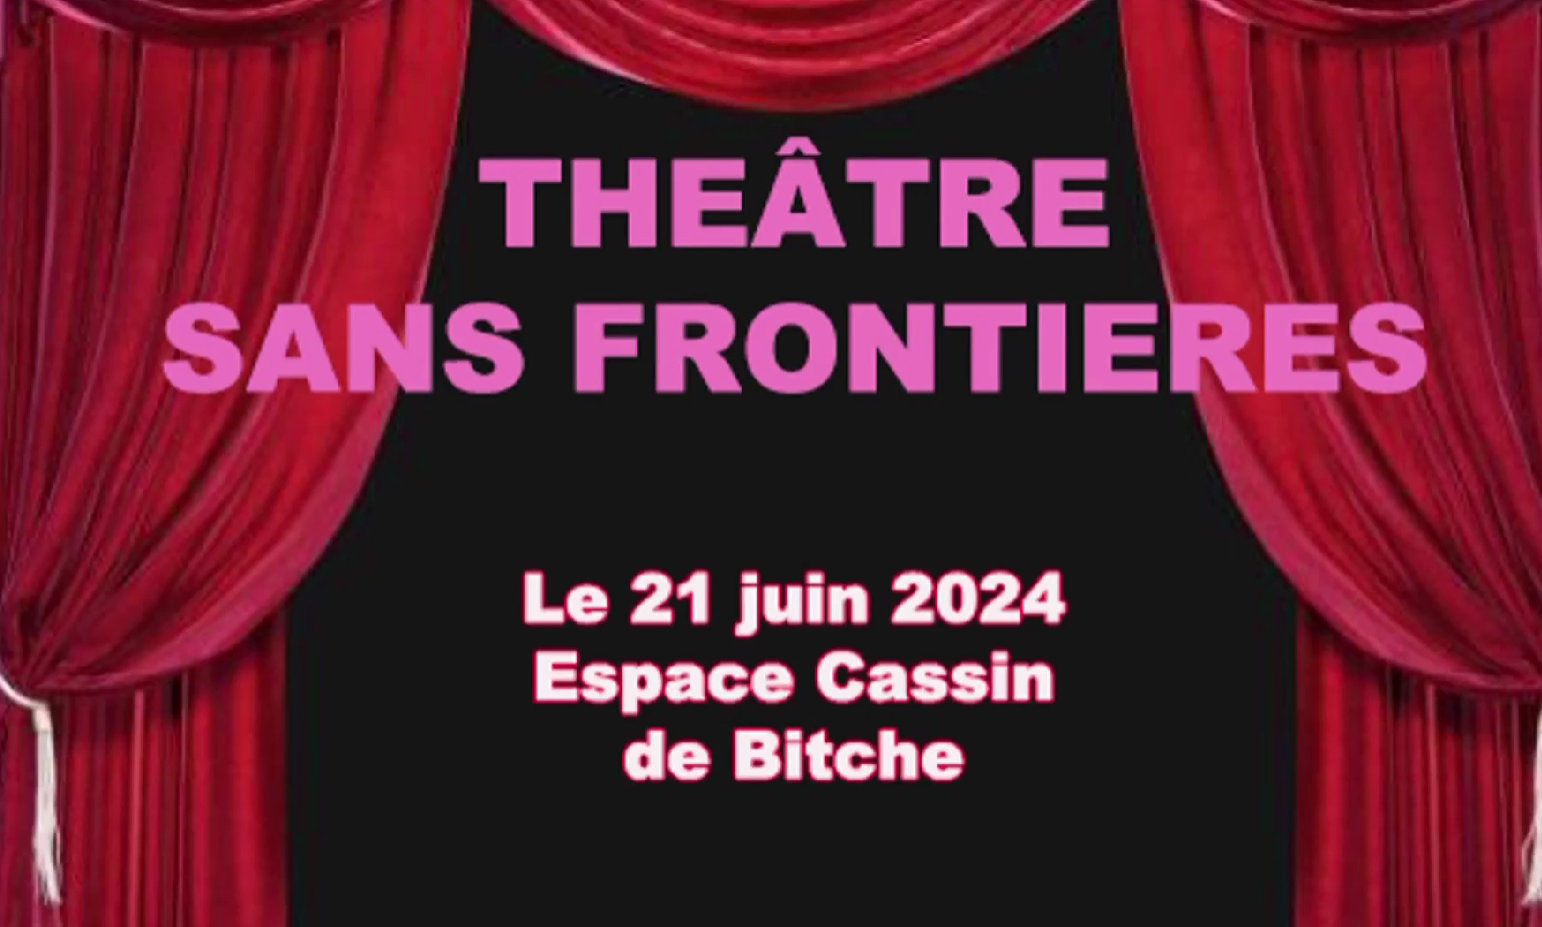 You are currently viewing THEATRE SANS FRONTIERE